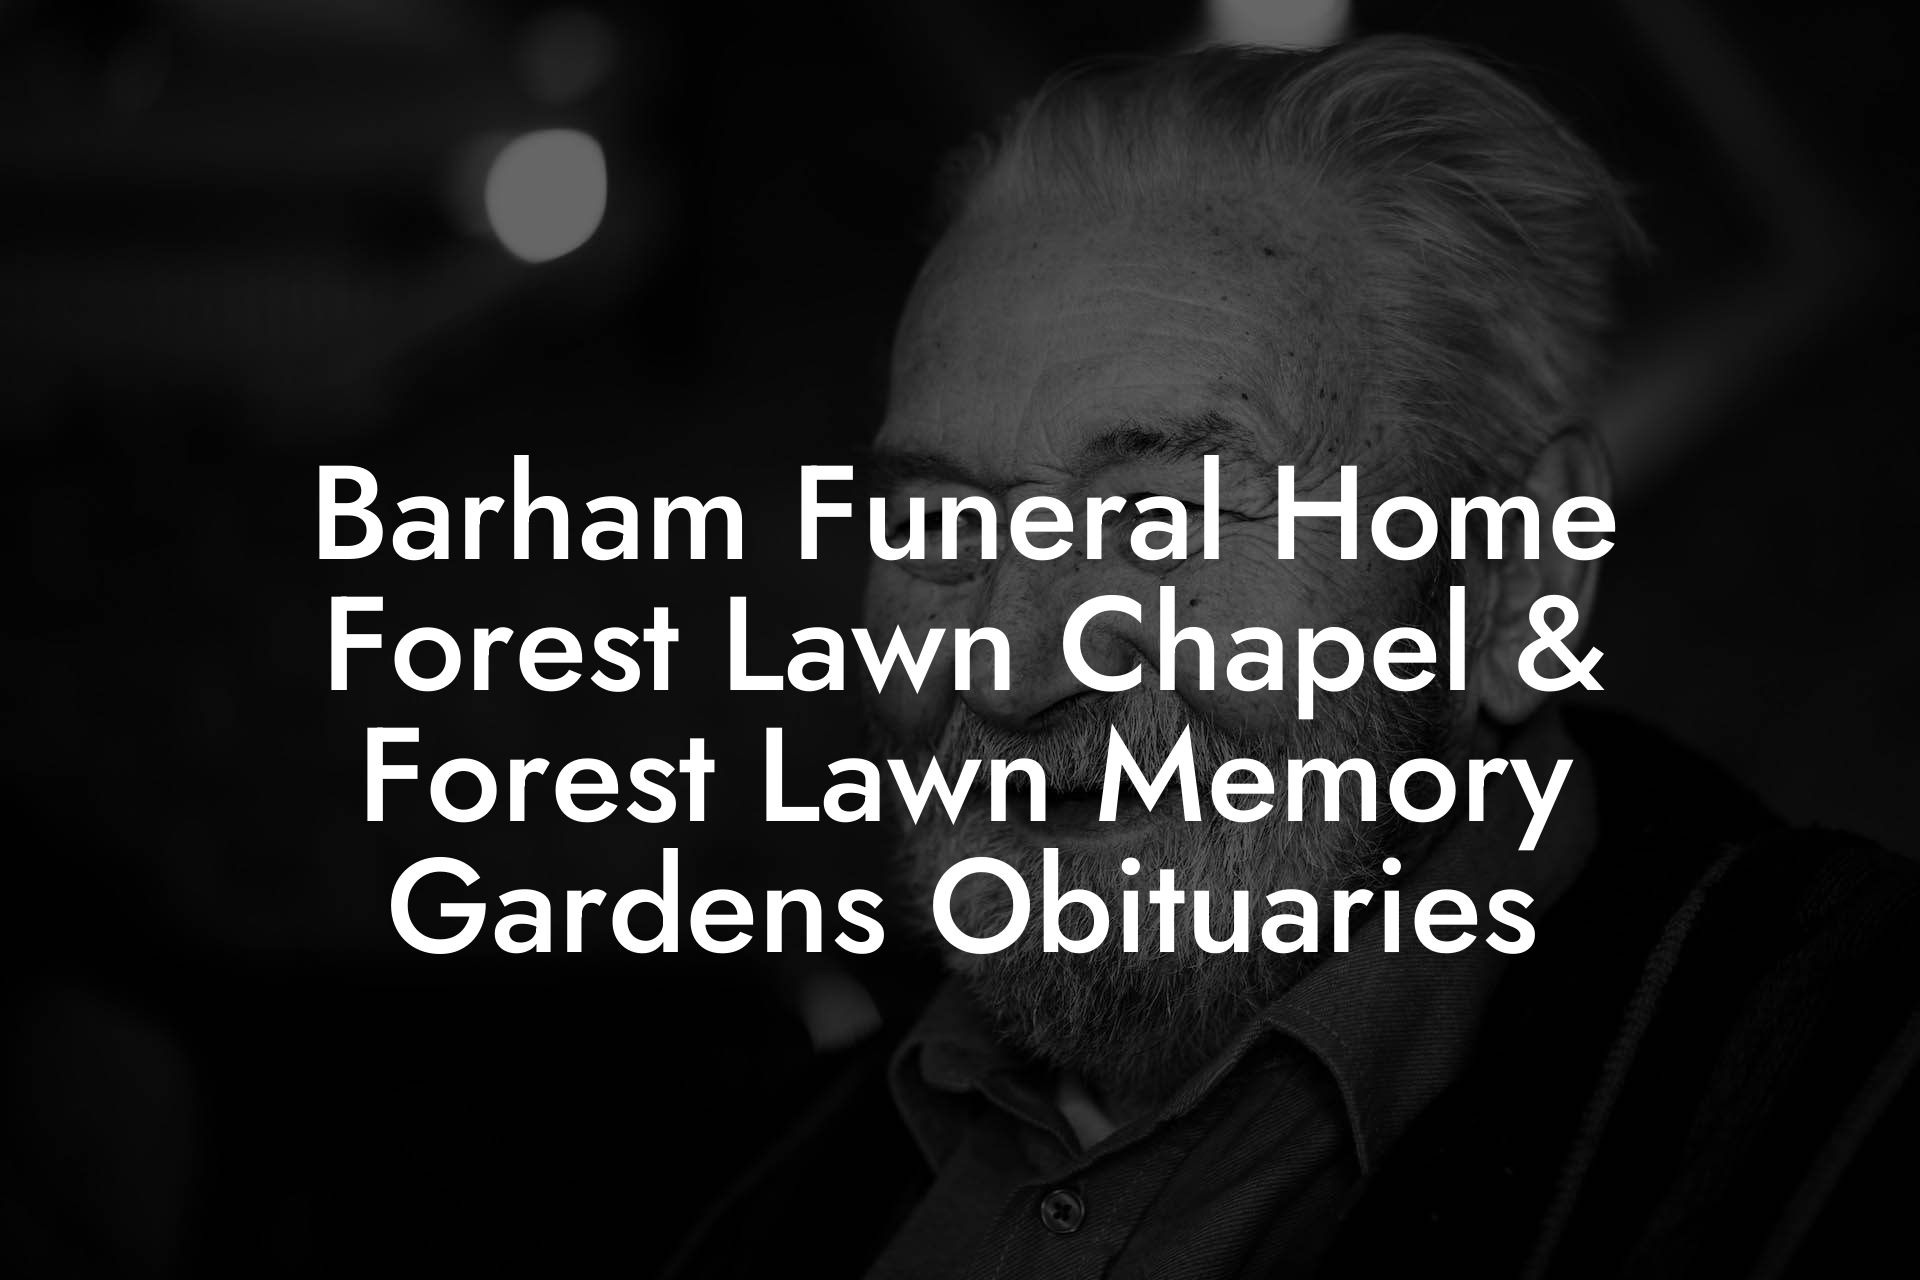 Barham Funeral Home Forest Lawn Chapel & Forest Lawn Memory Gardens Obituaries